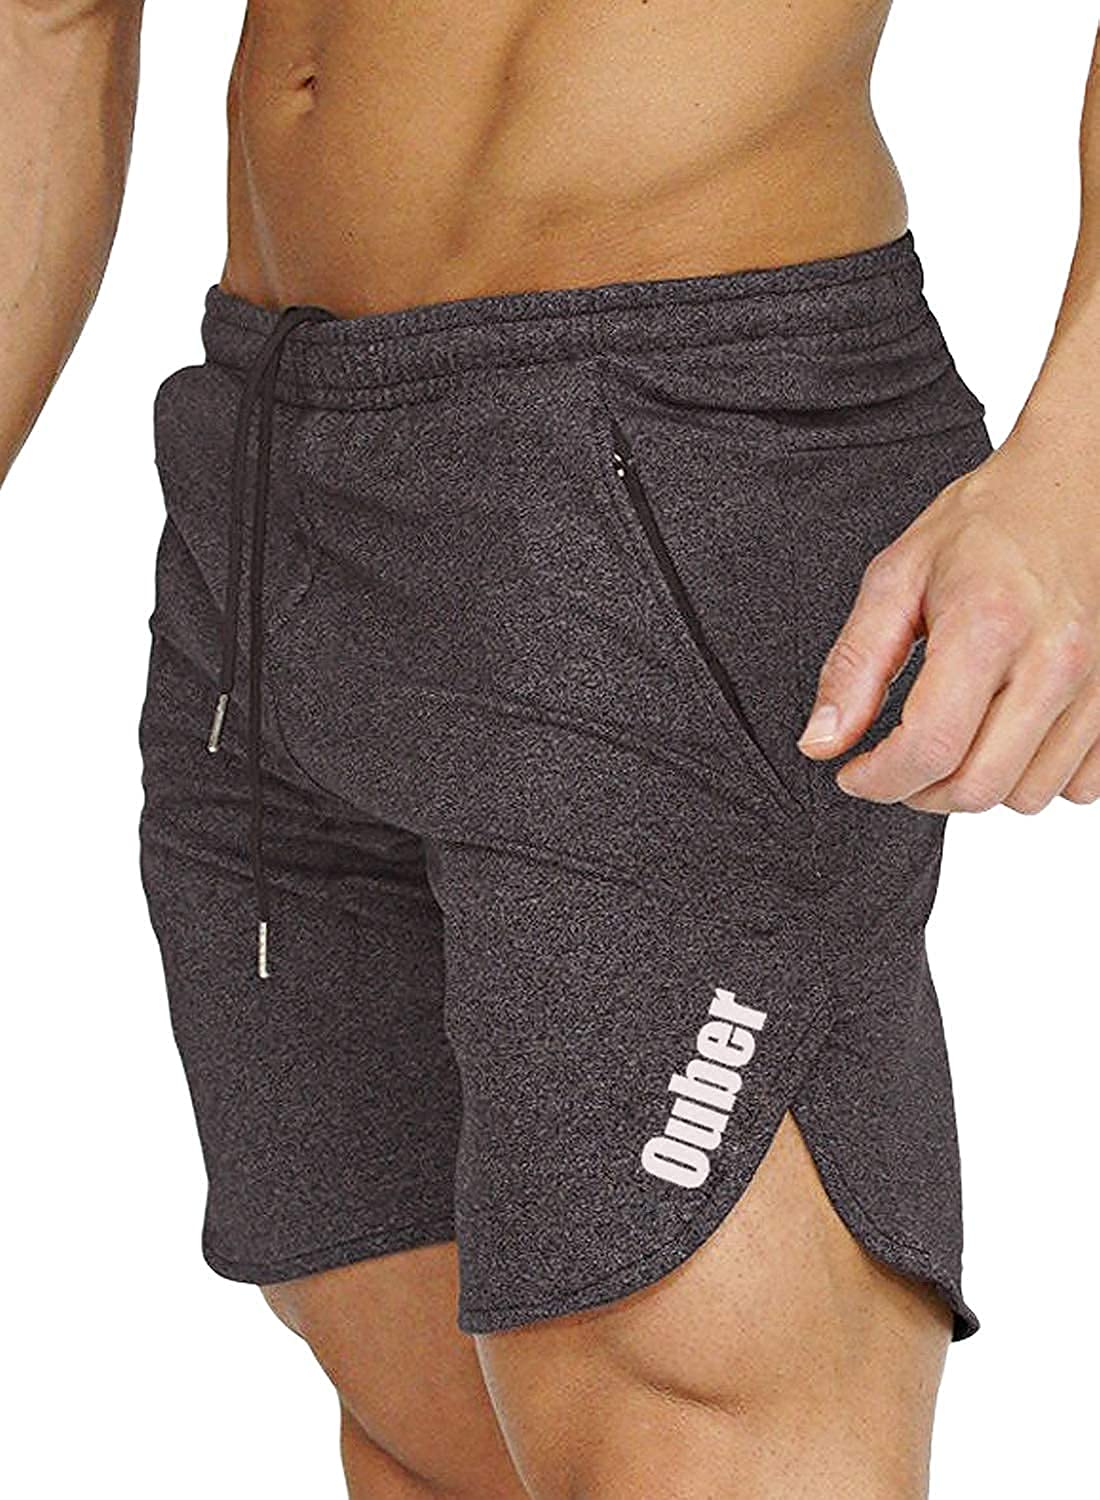 Ouber Mens Bodybuilding Lifting Gym Workout Sweat Shorts